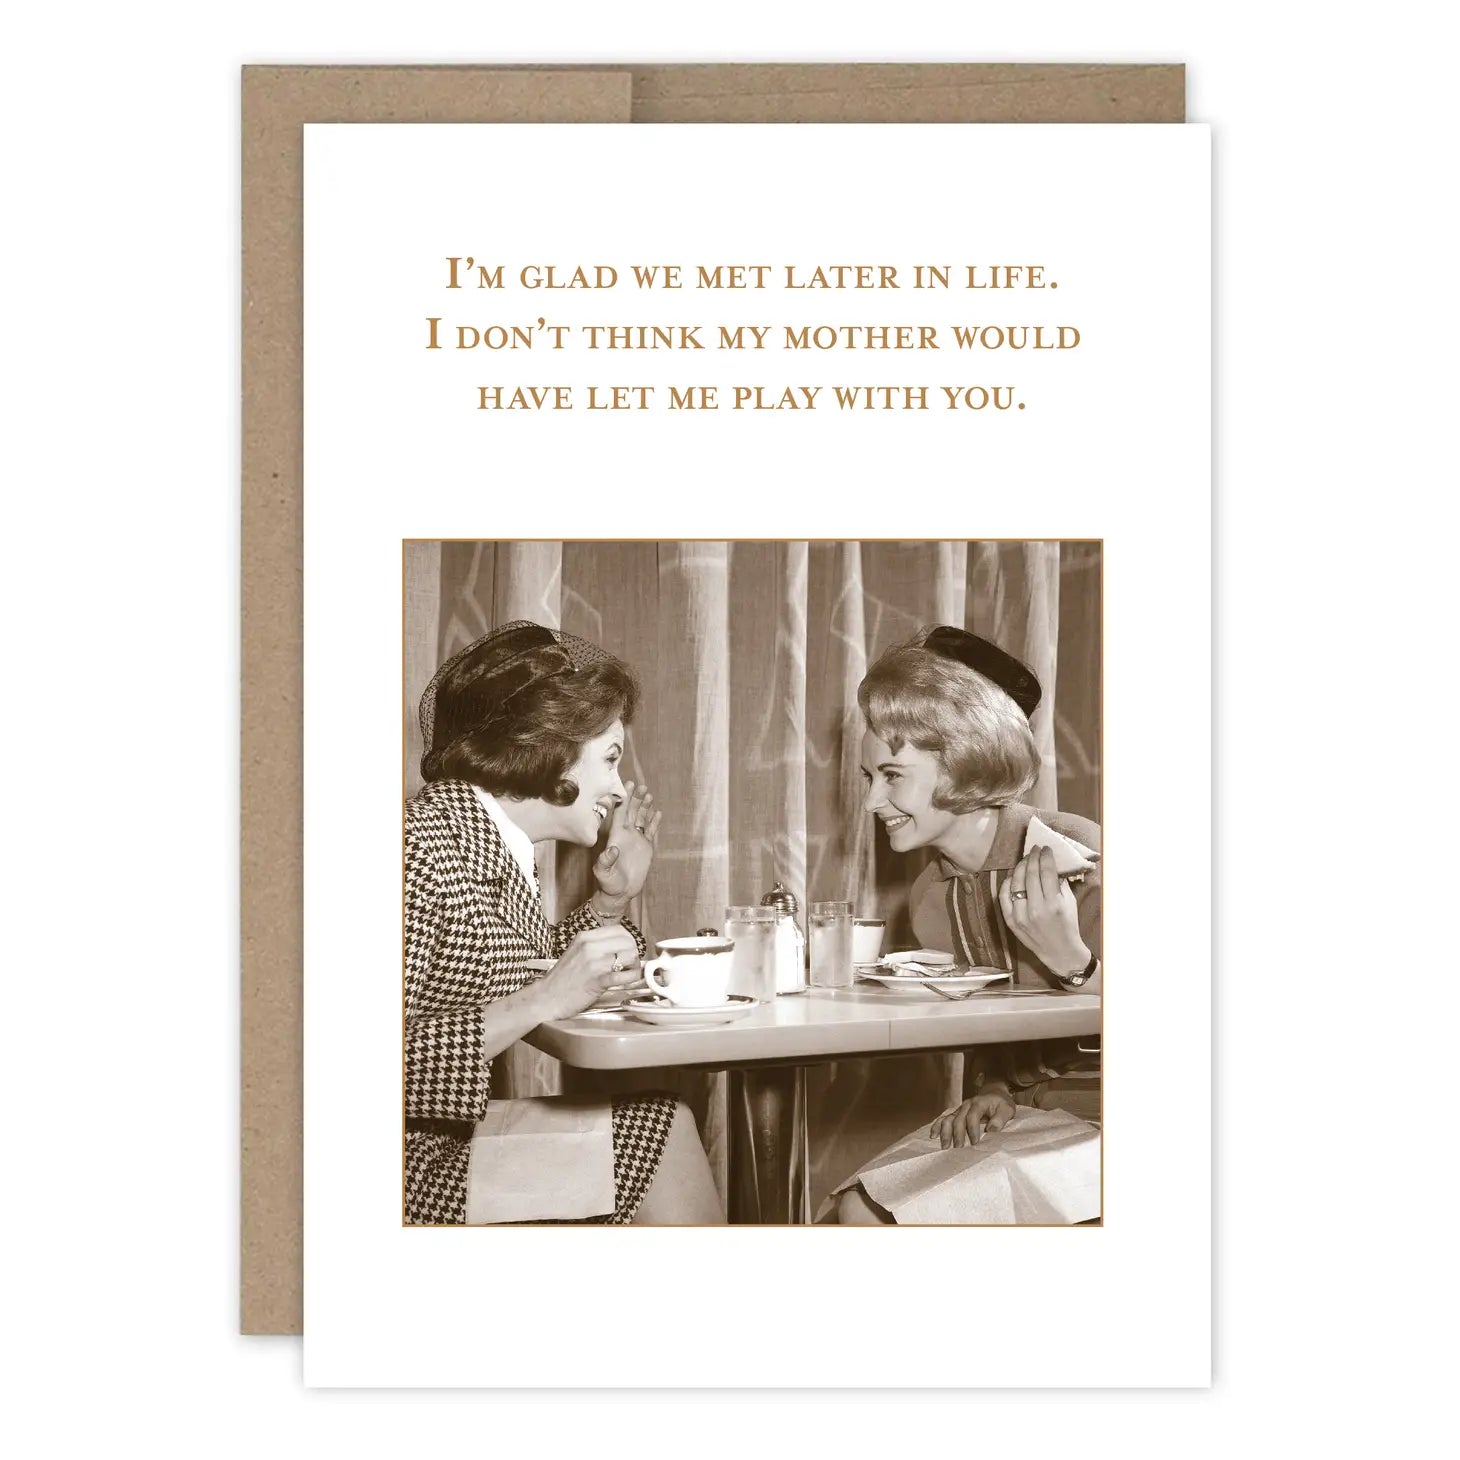 I'm glad we met later in life....greeting card